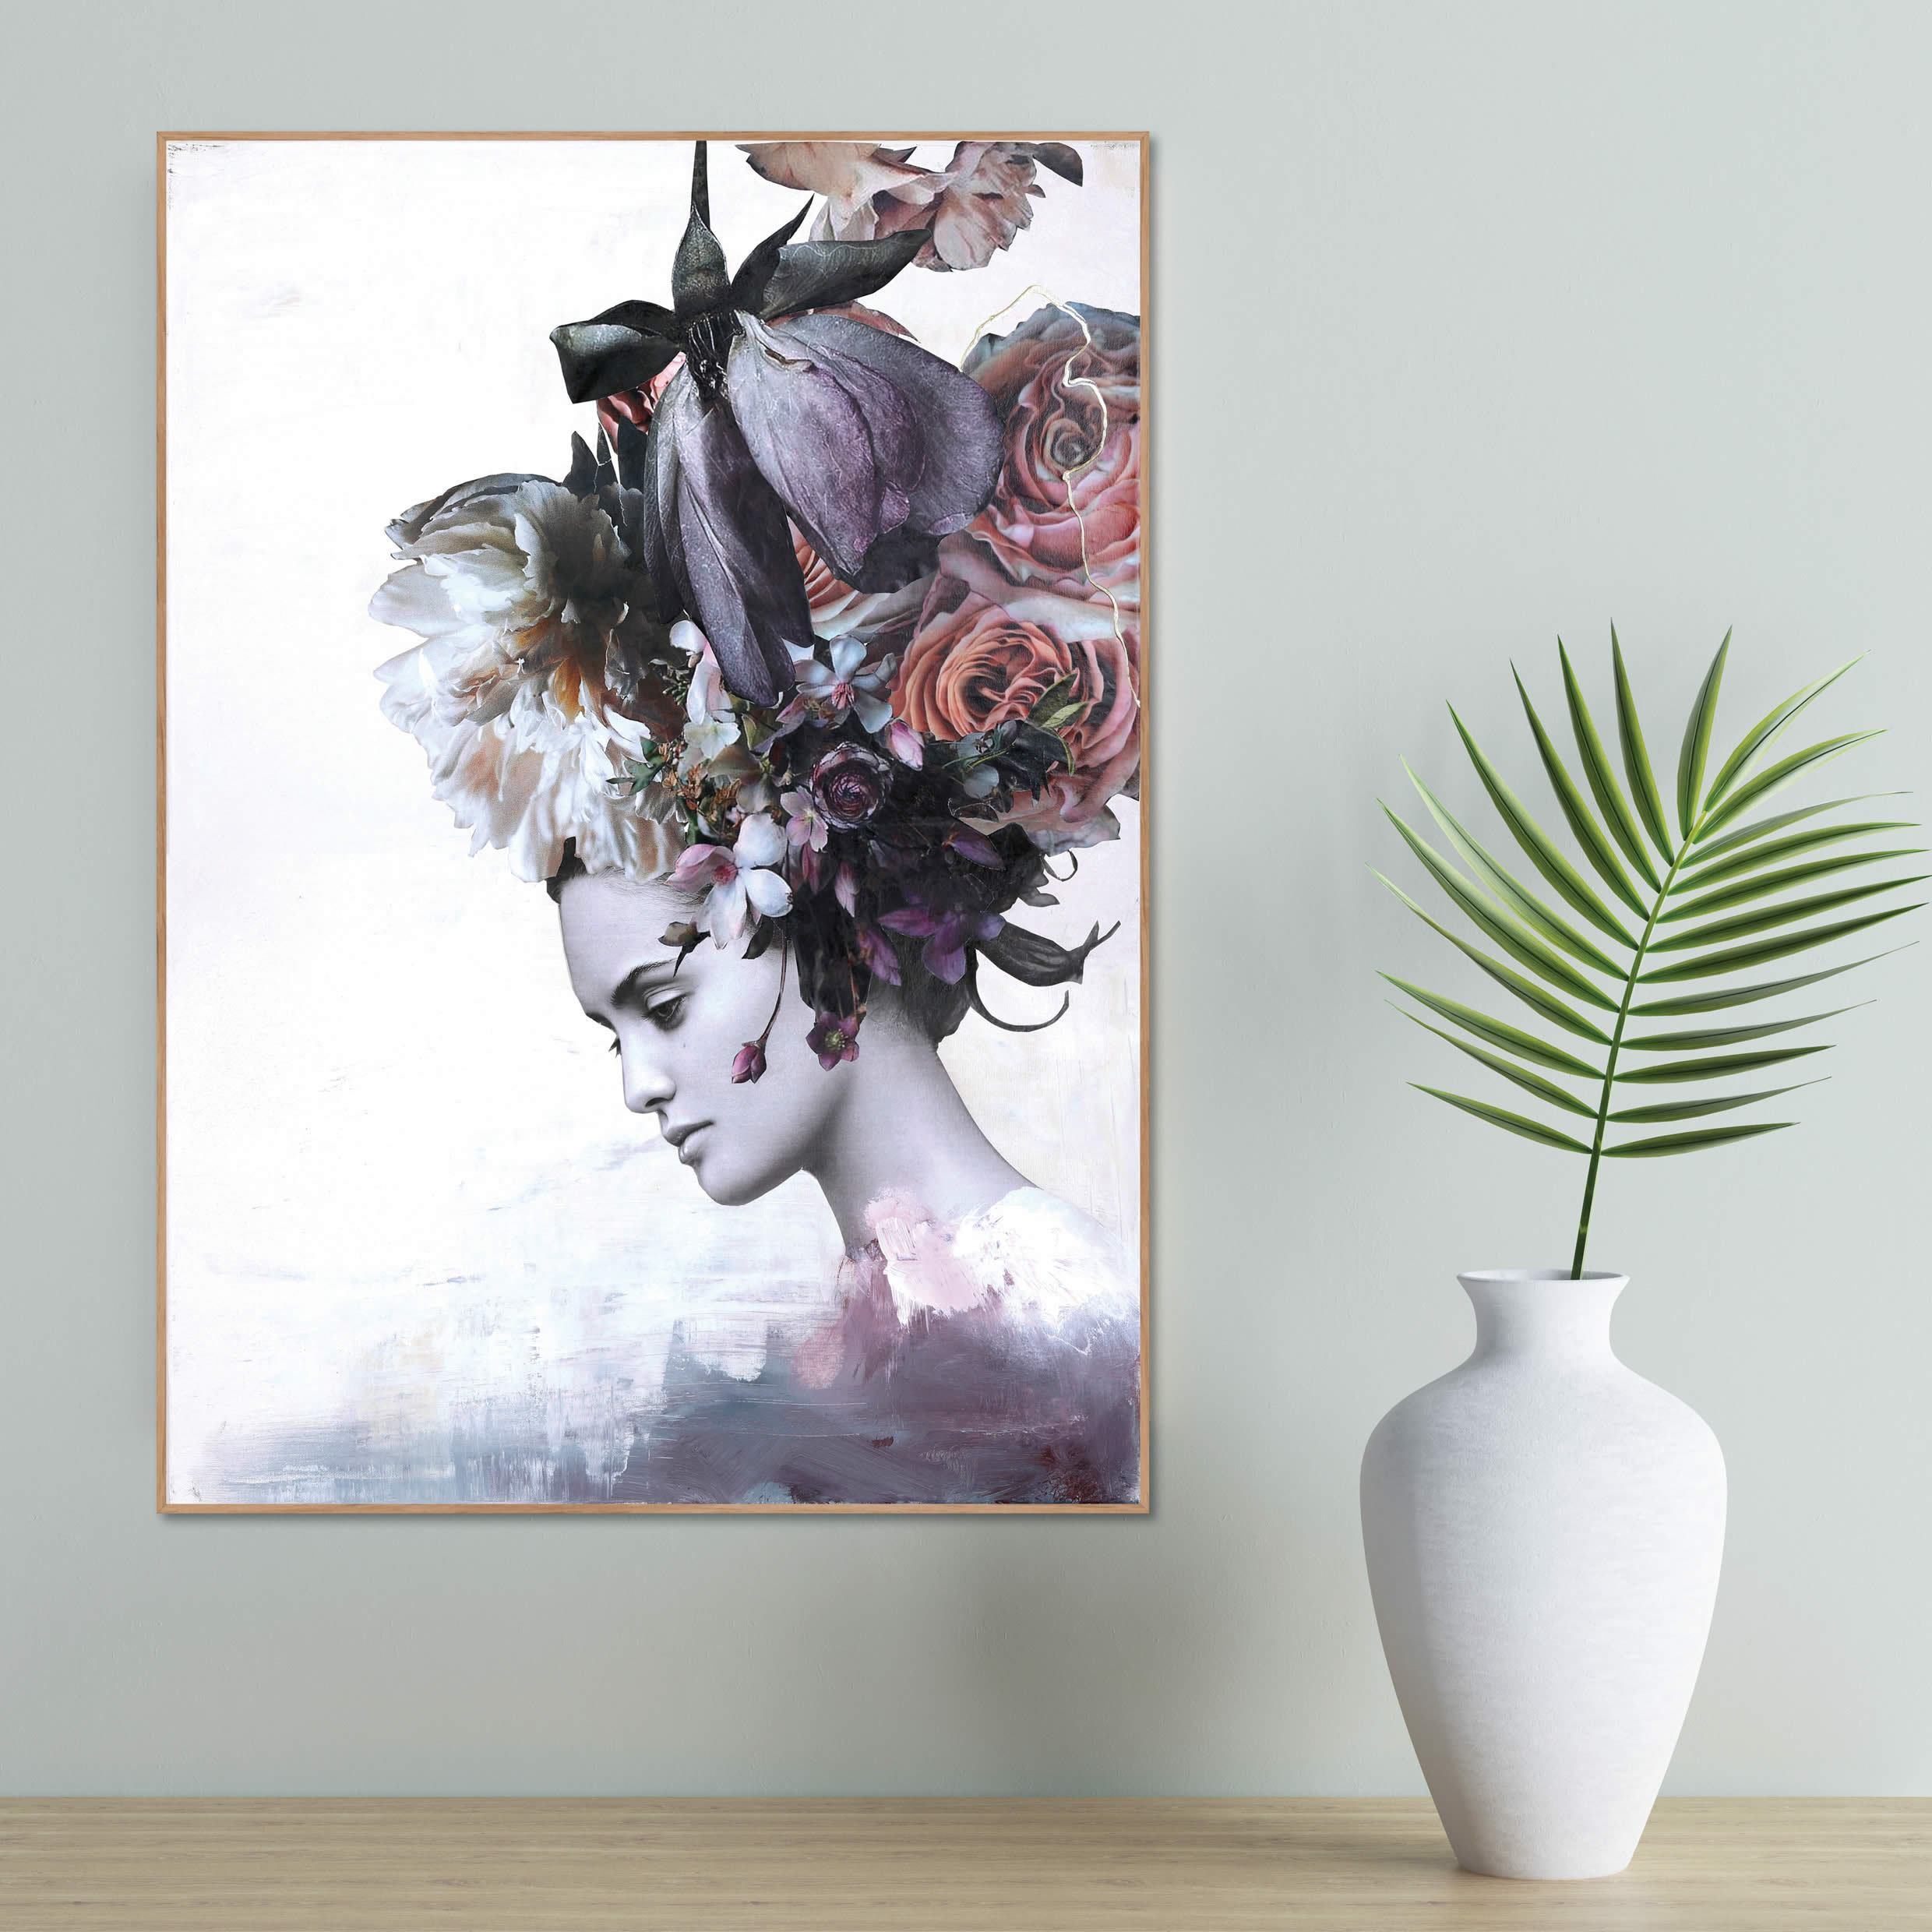 Haute couture 7 | FRAMED PRINT